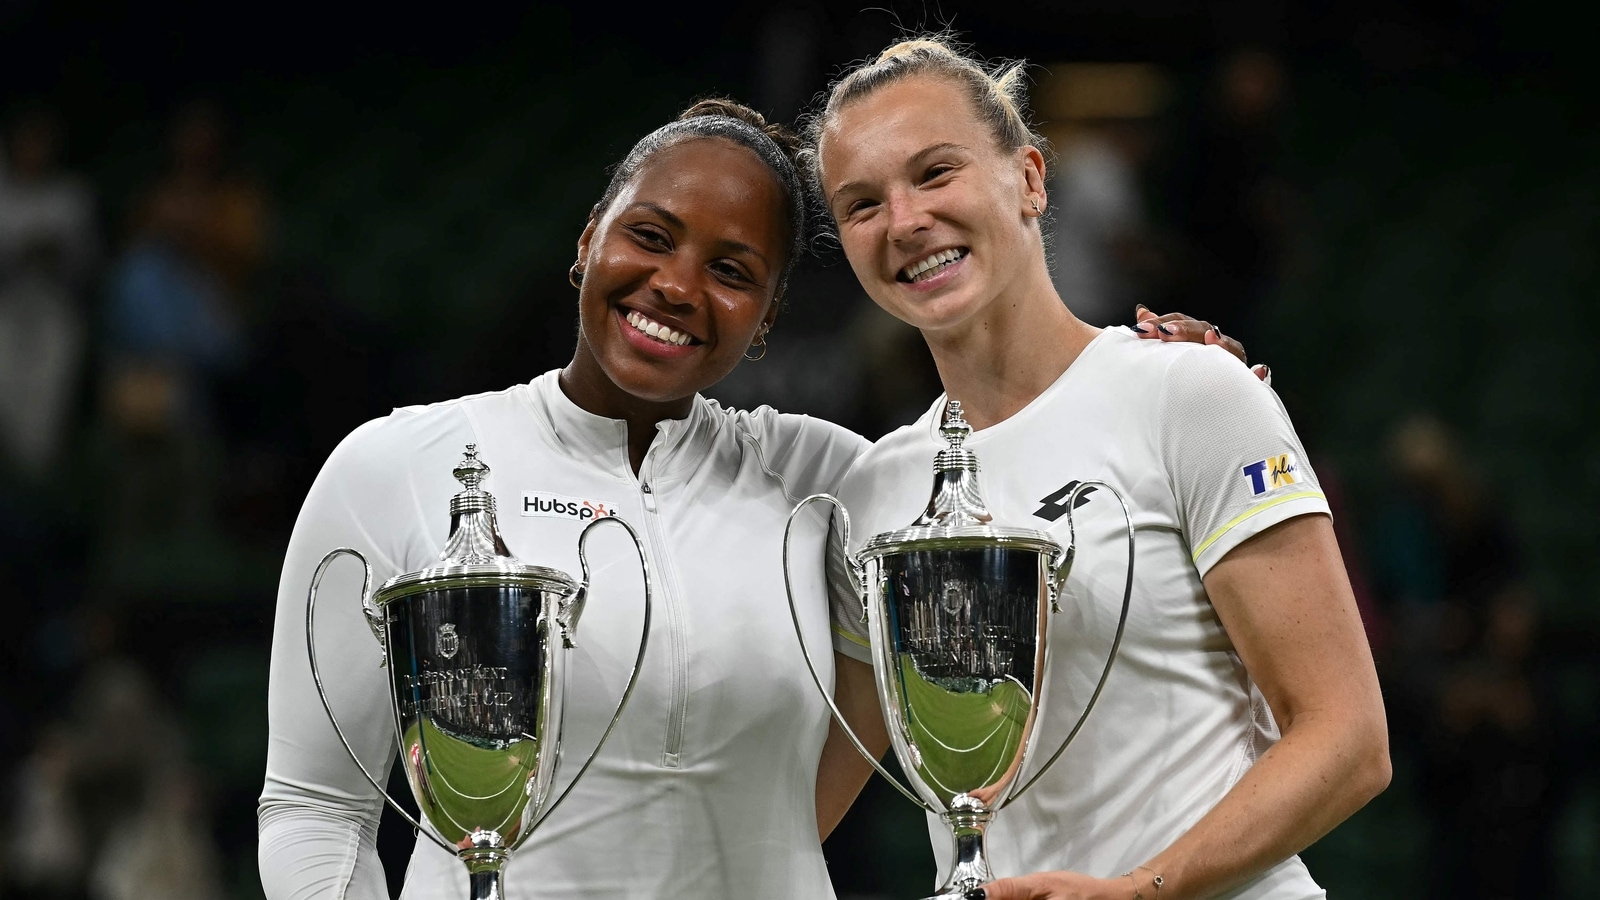 American Taylor Townsend wins the Wimbledon women’s doubles title together with Katerina Siniakova | Tennis News